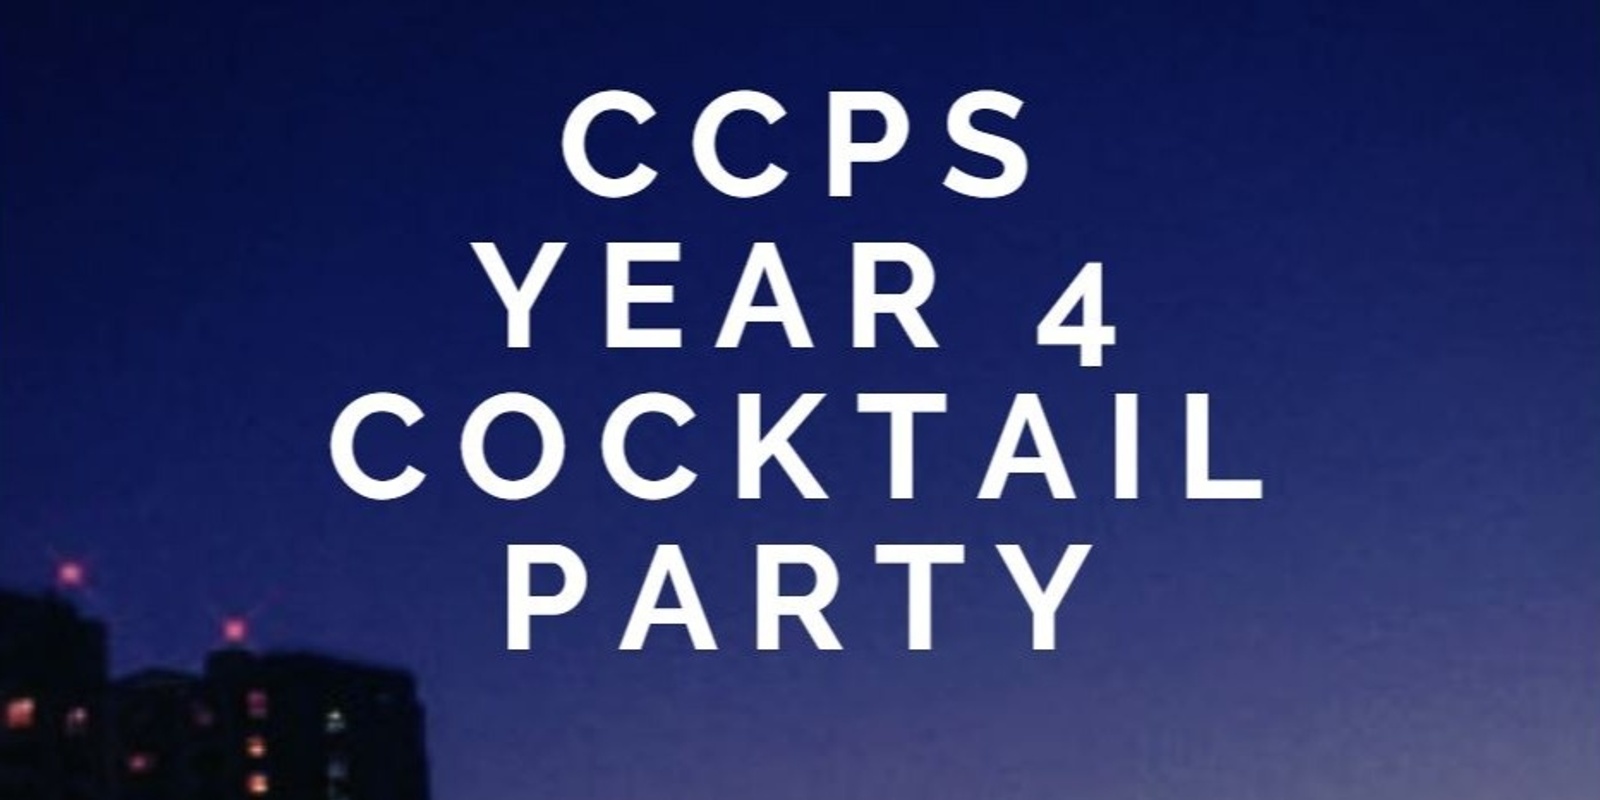 Banner image for CCPS Year 4 Cocktail Party